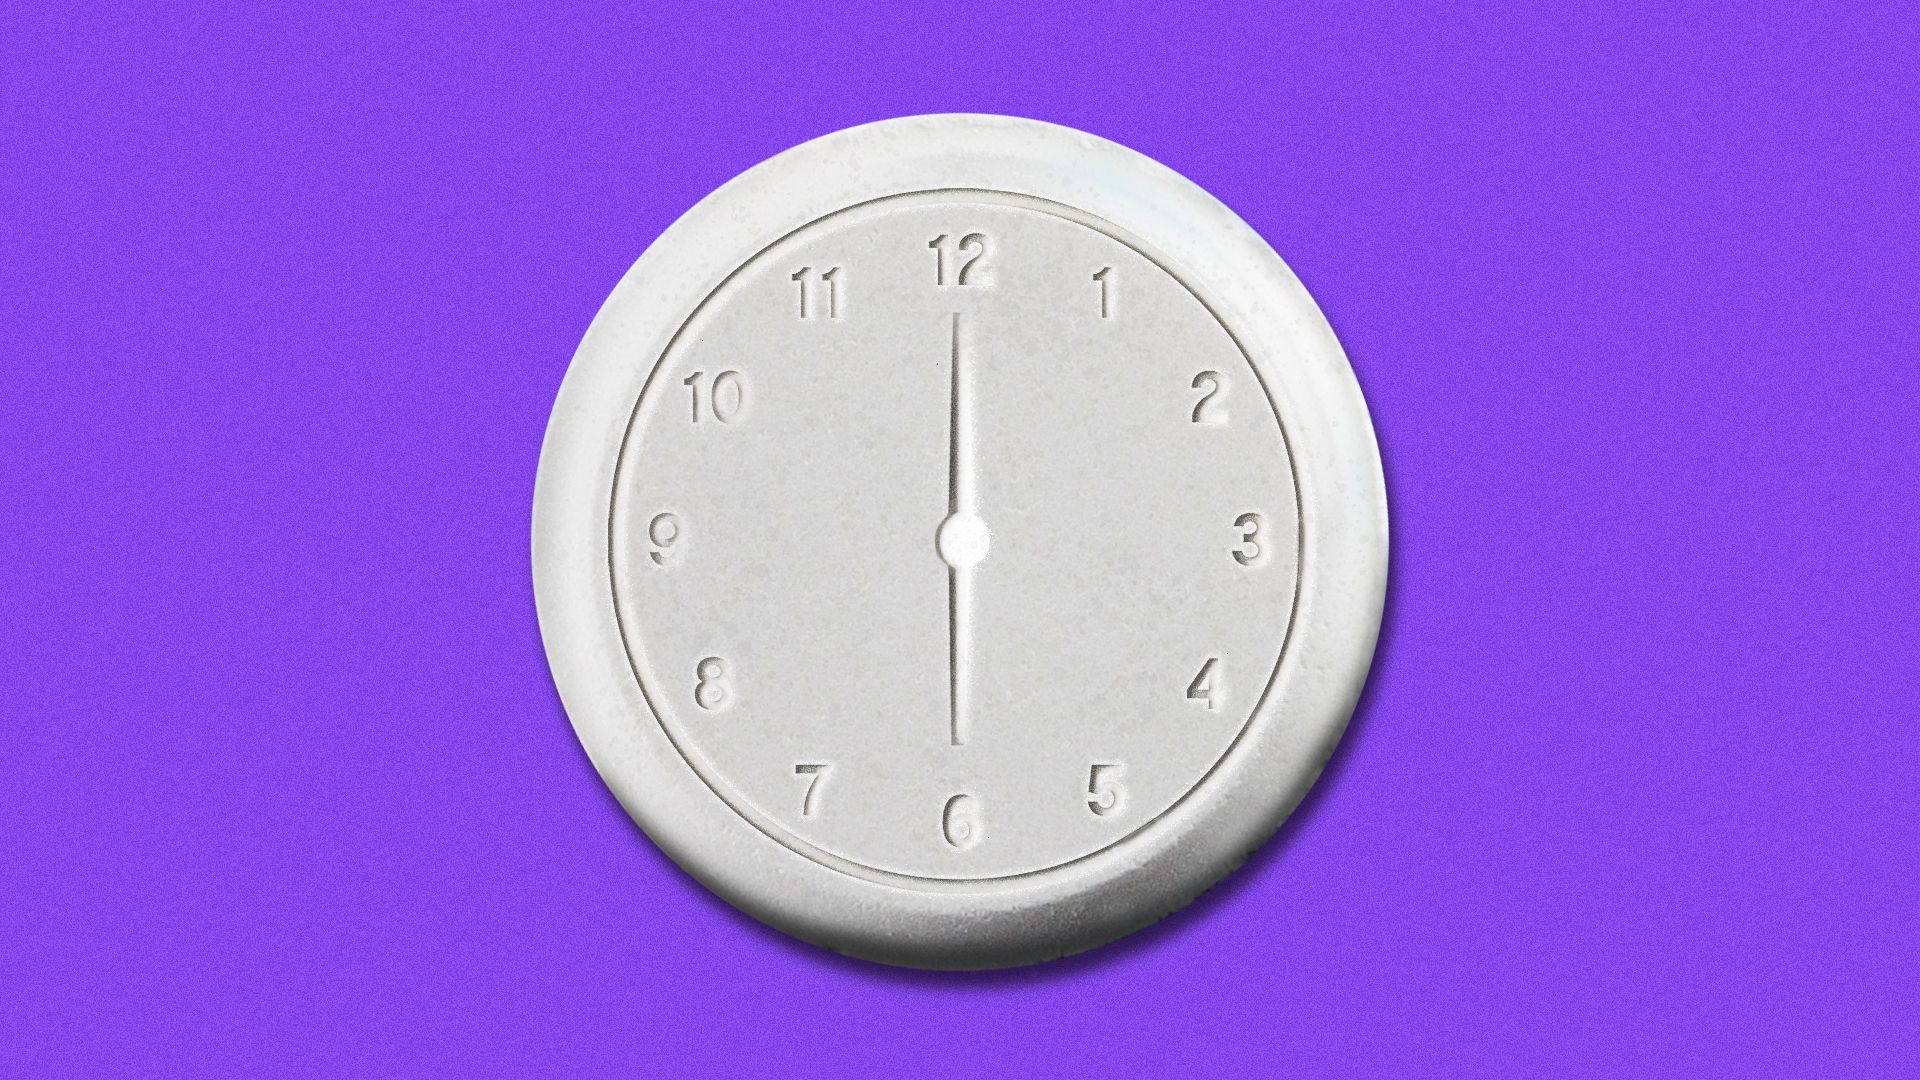 Illustration of a pill with a clock face on it